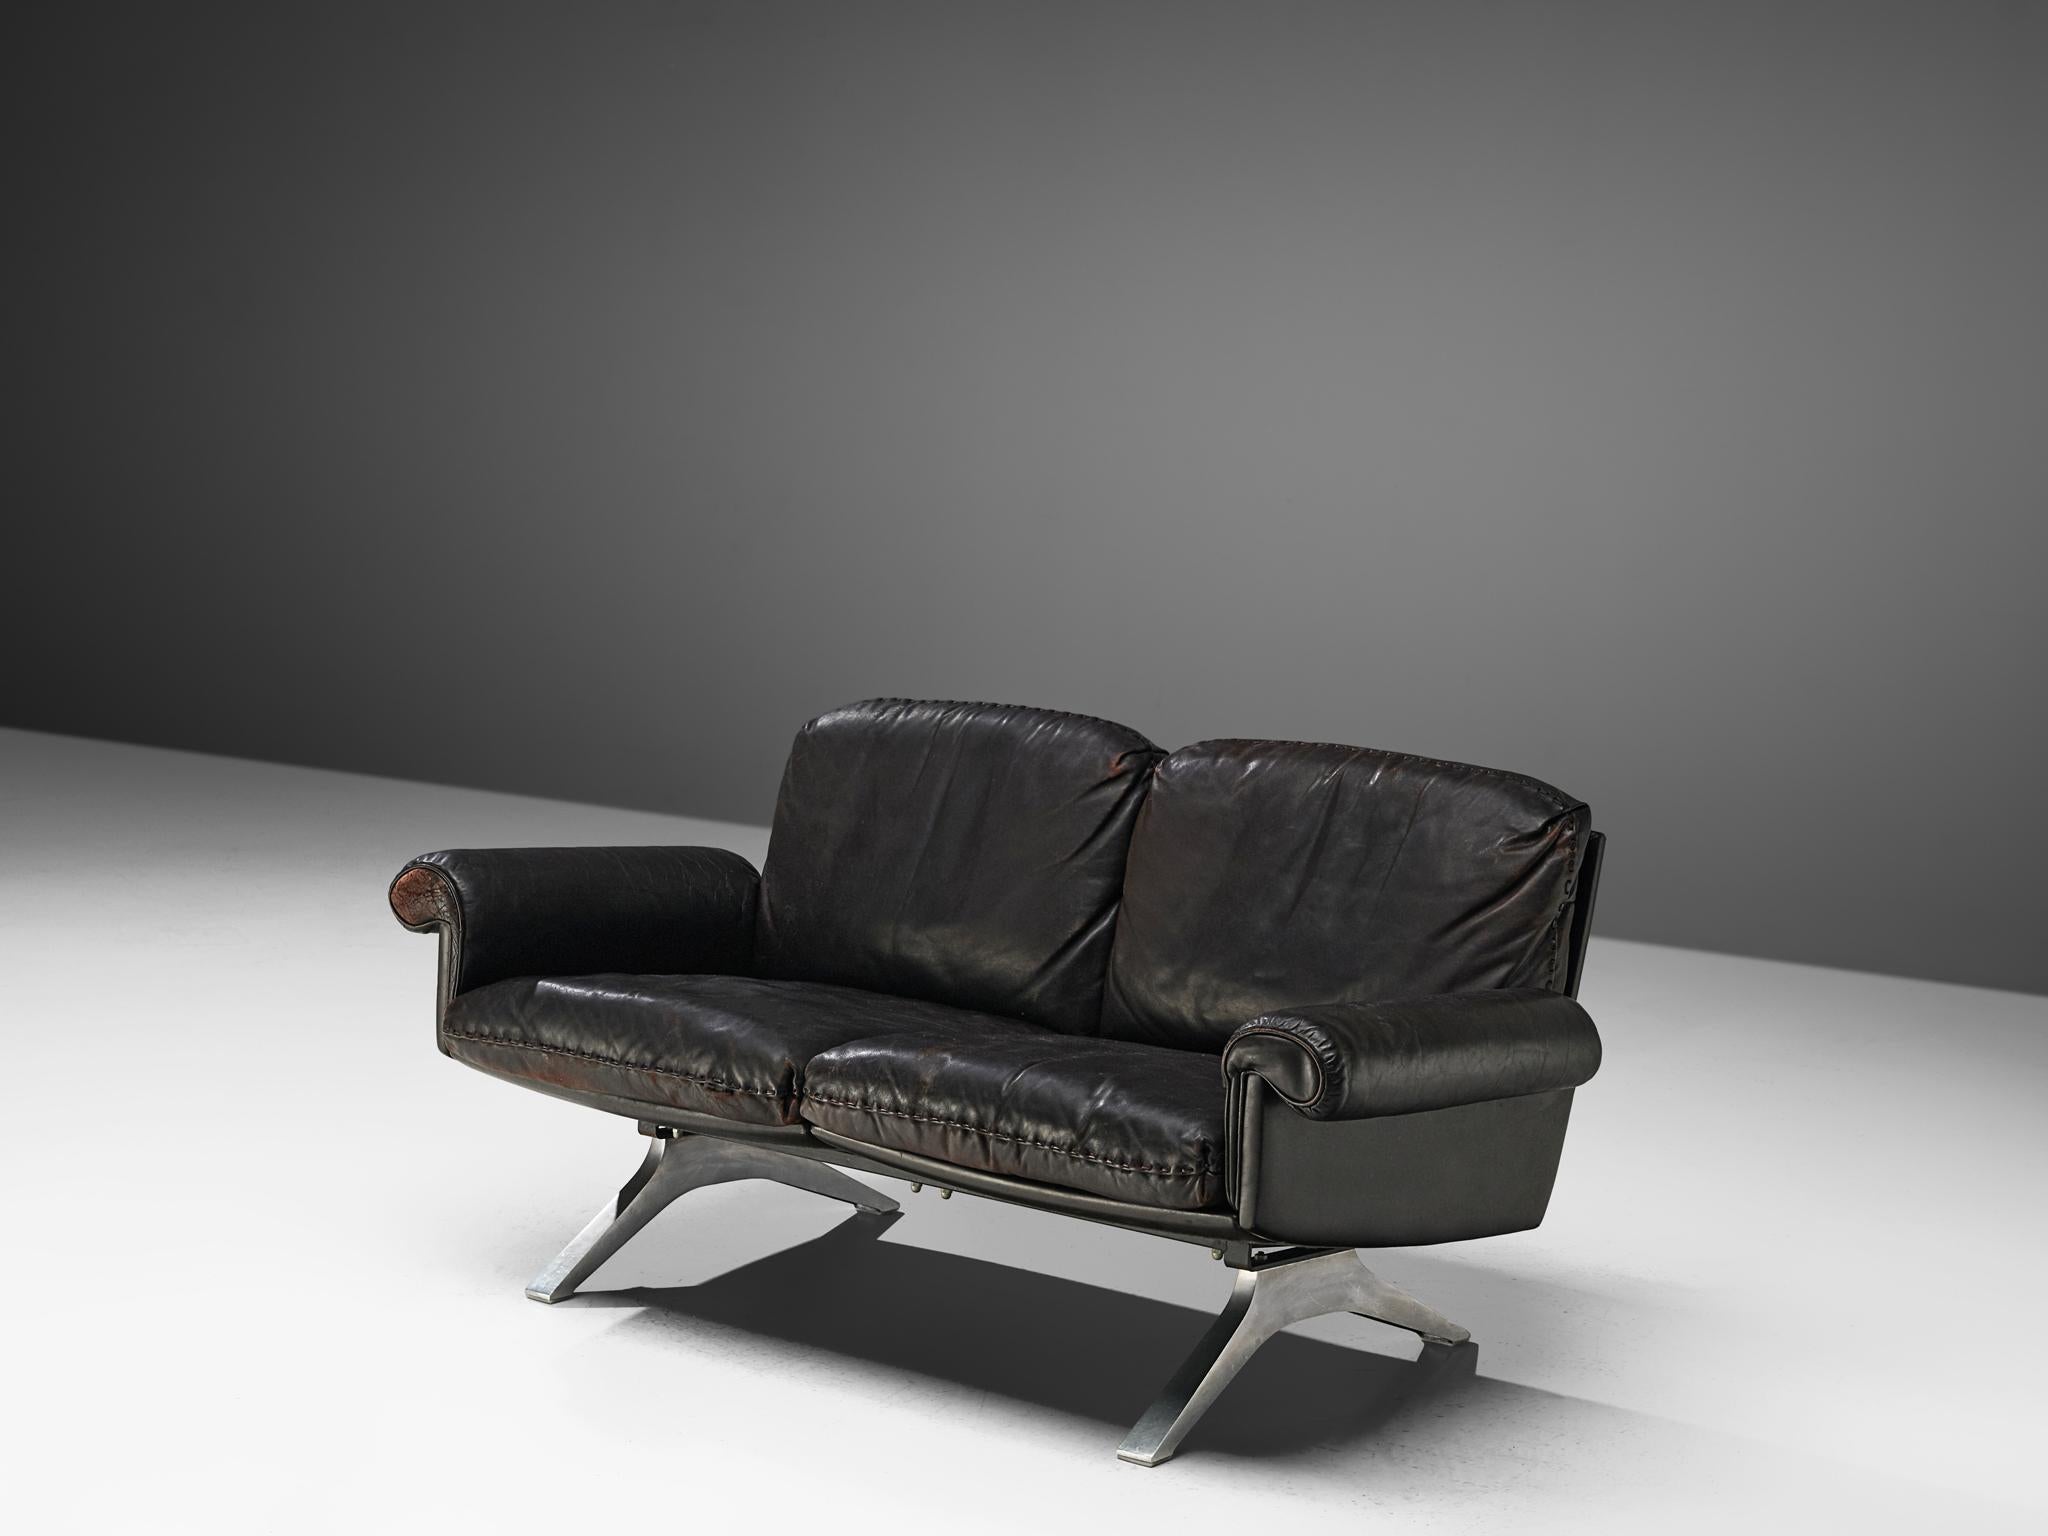 De Sede, 'DS31' settee, leather and steel, Switzerland, 1970s.

Highly comfortable DS31 two-seat sofa in chocolate brown leather by De Sede. The design is simplistic, yet very modern. The tilted seat is wide with outstanding, curved armrests. The